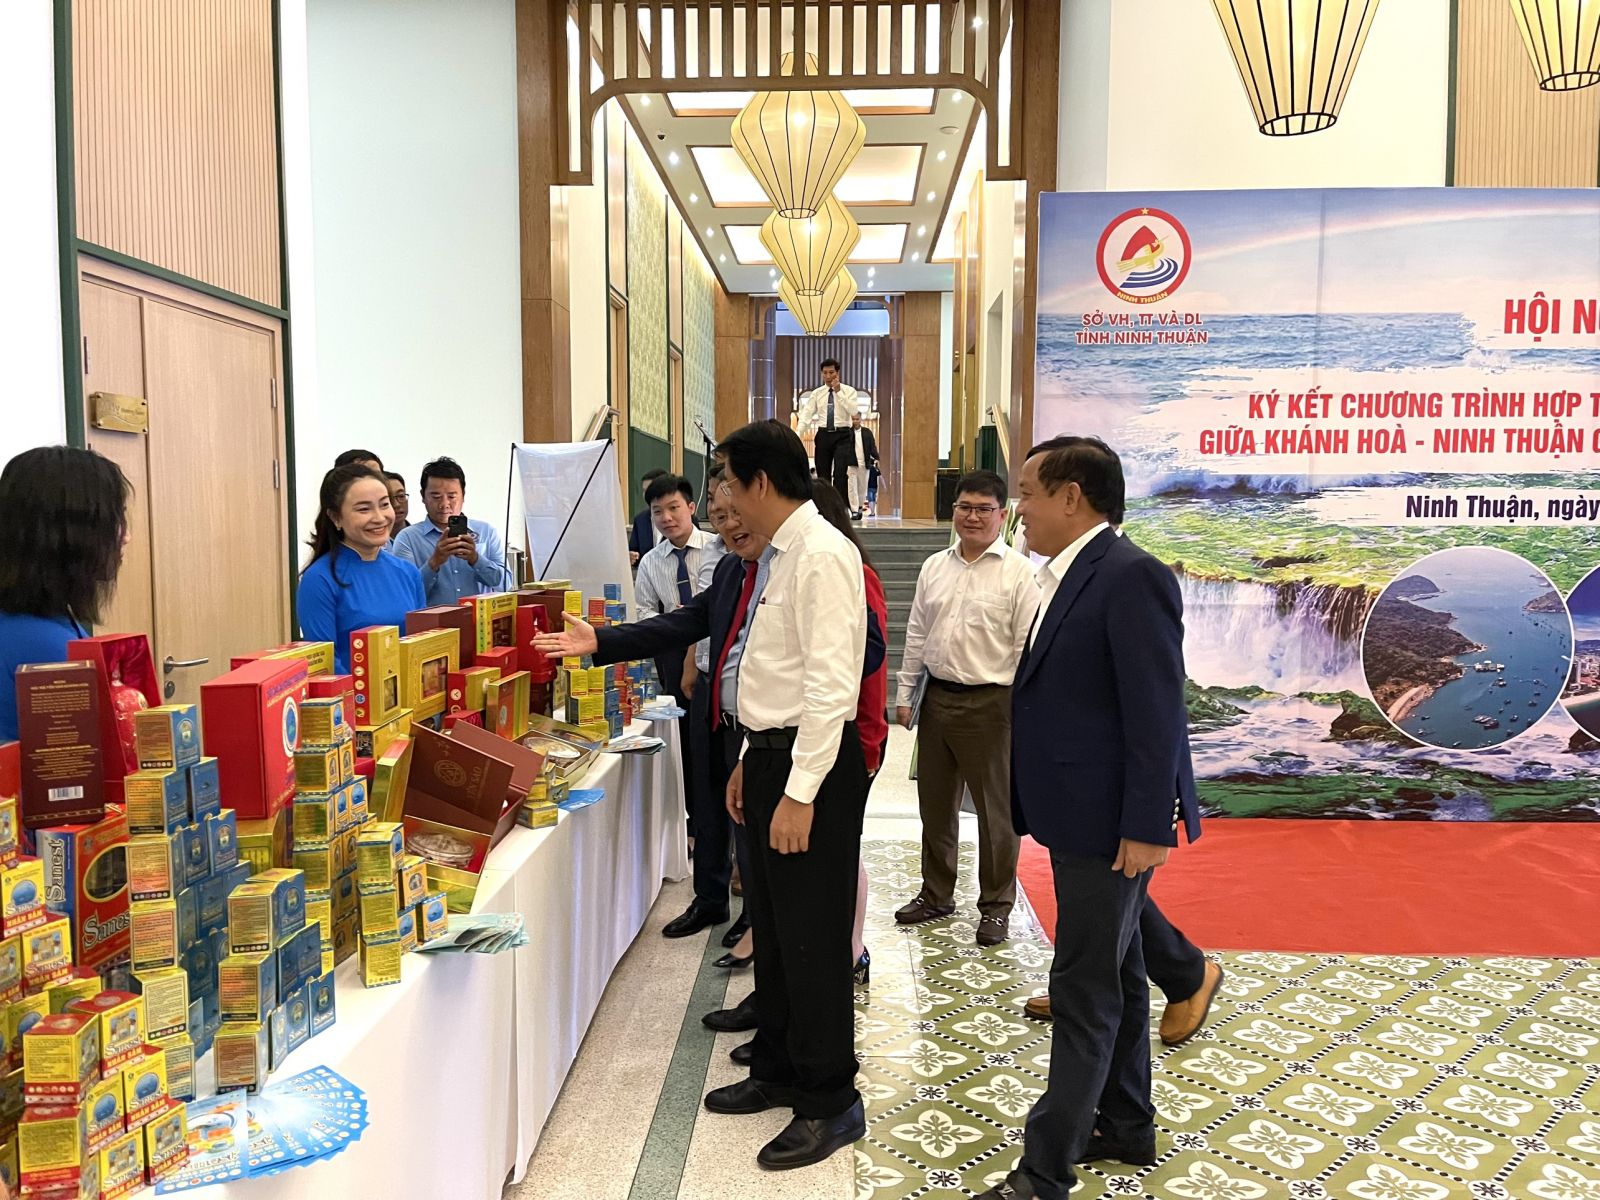 Conference on tourism development cooperation between Khanh Hoa and Ninh Thuan